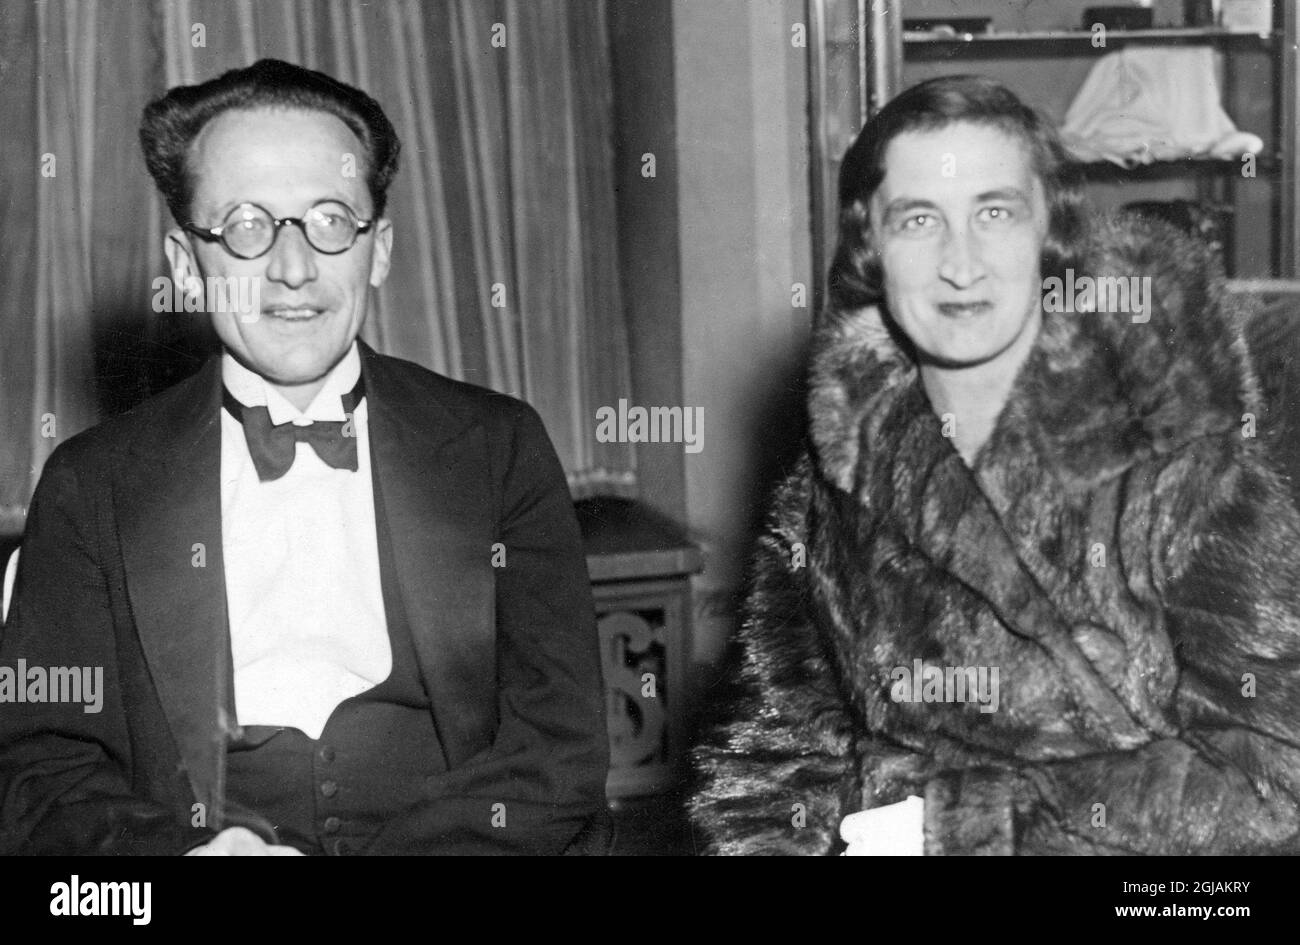 Austrian physicist Erwin Schrodinger, with Mrs Schrodinger, received the Nobel Prize in Physics in 1933 with Paul Dirac for the discovery of new productive forms of atomic theory. Stock Photo